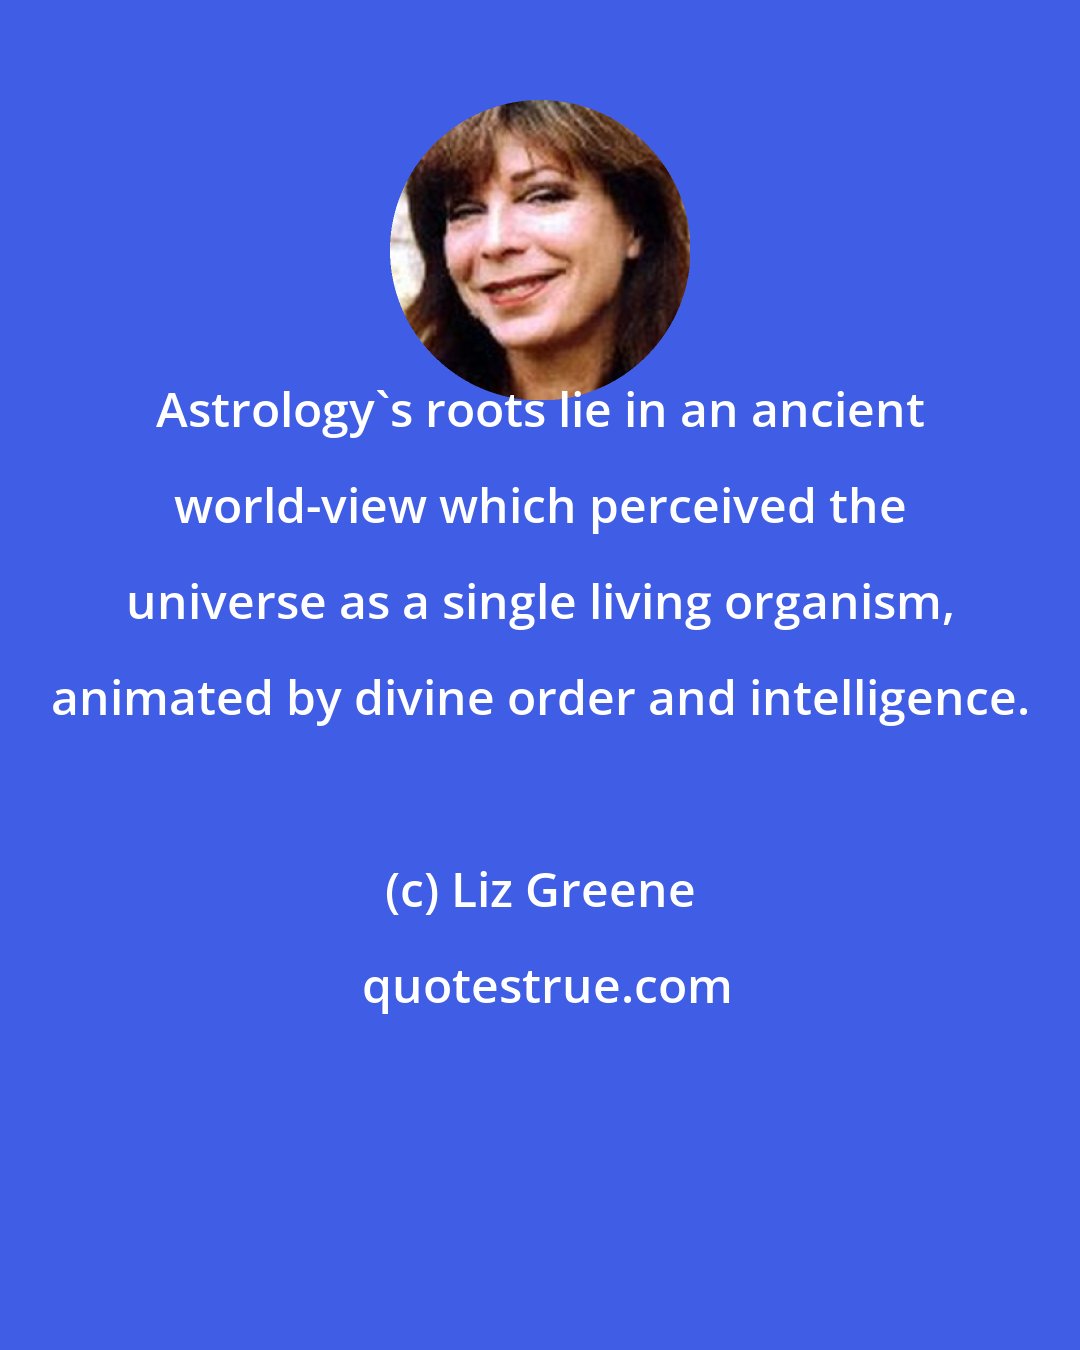 Liz Greene: Astrology's roots lie in an ancient world-view which perceived the universe as a single living organism, animated by divine order and intelligence.